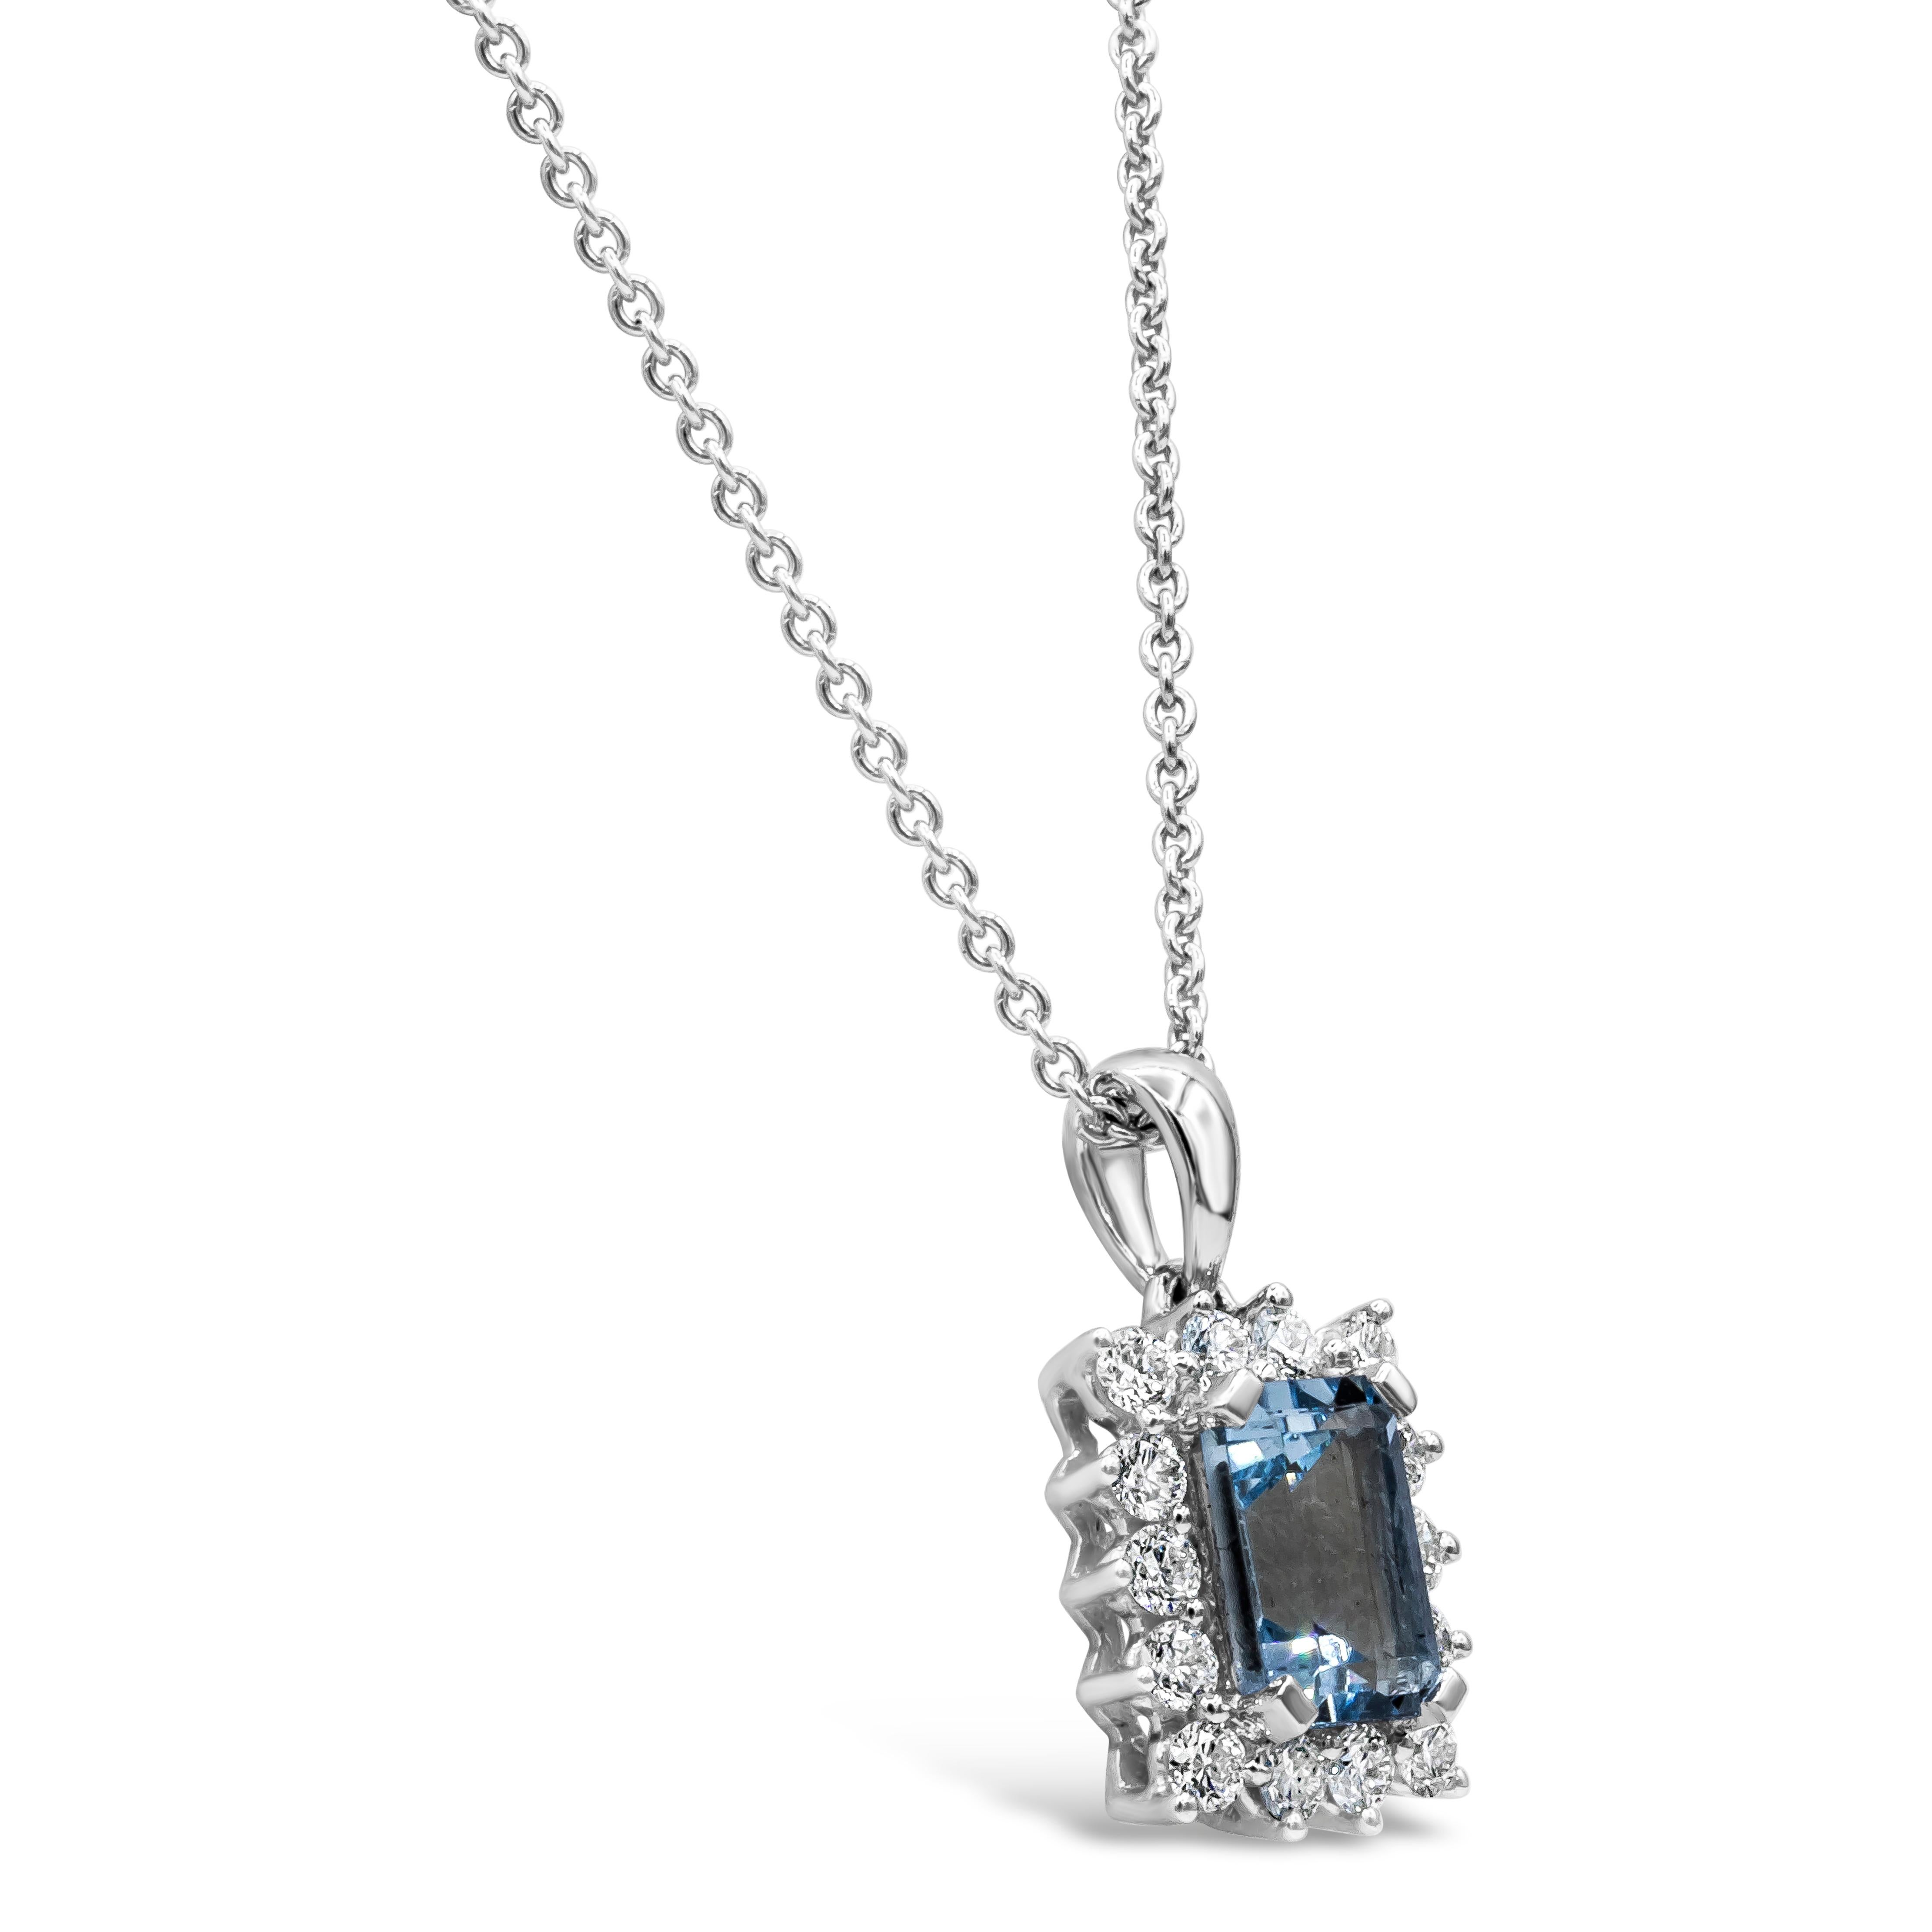 Features a 0.95 carat aquamarine, surrounded by a single row of round brilliant diamonds. Diamonds weigh 0.35 carats total. Made in 18 karat white gold. Suspended on a 16 inch chain (adjustable upon request).

